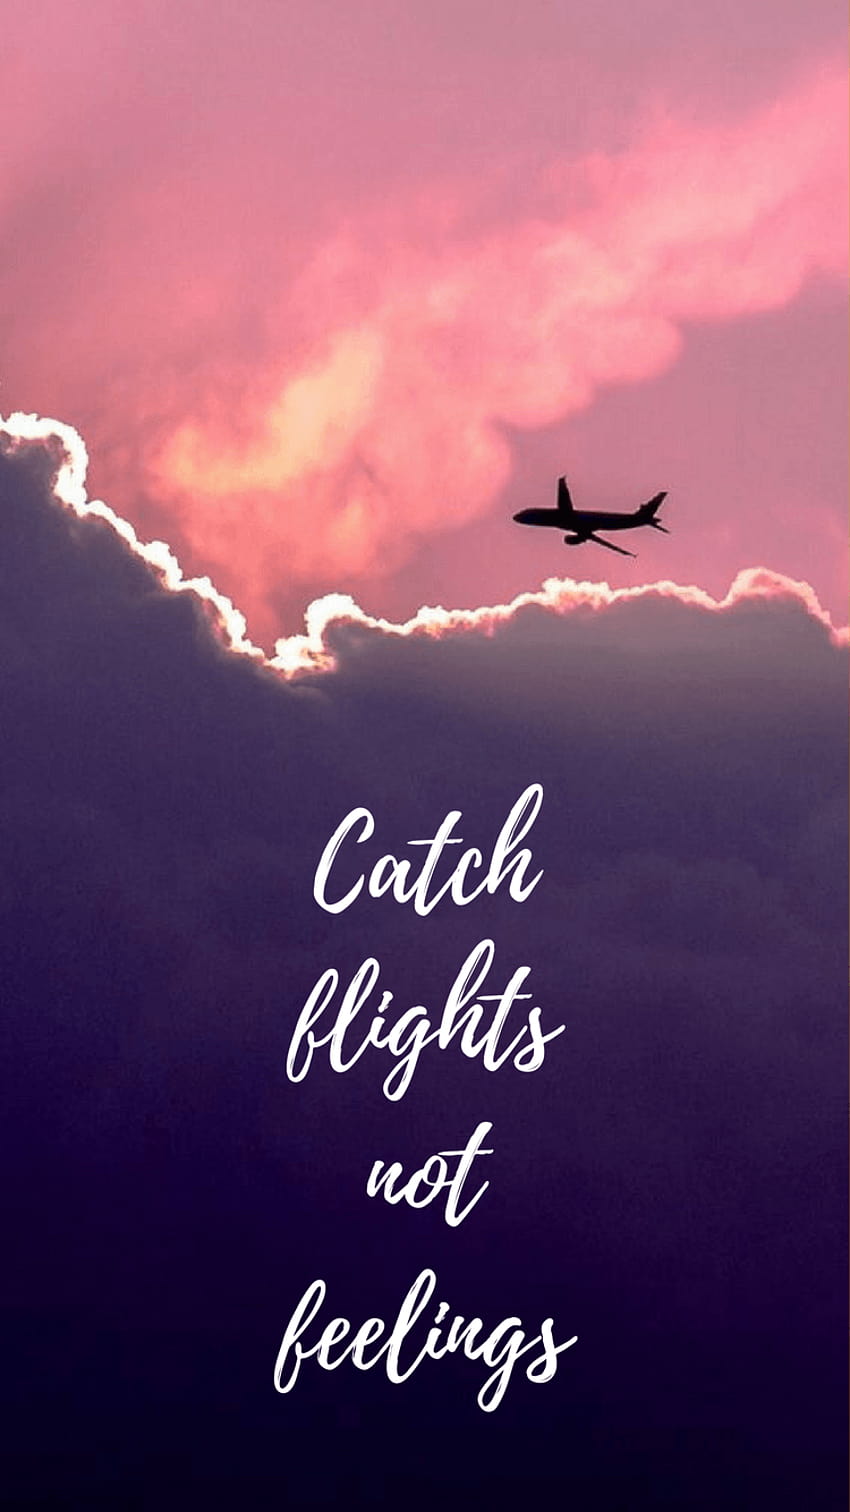 Catch flights not feelings travel iphone backgrounds, emirates airline iphone HD phone wallpaper